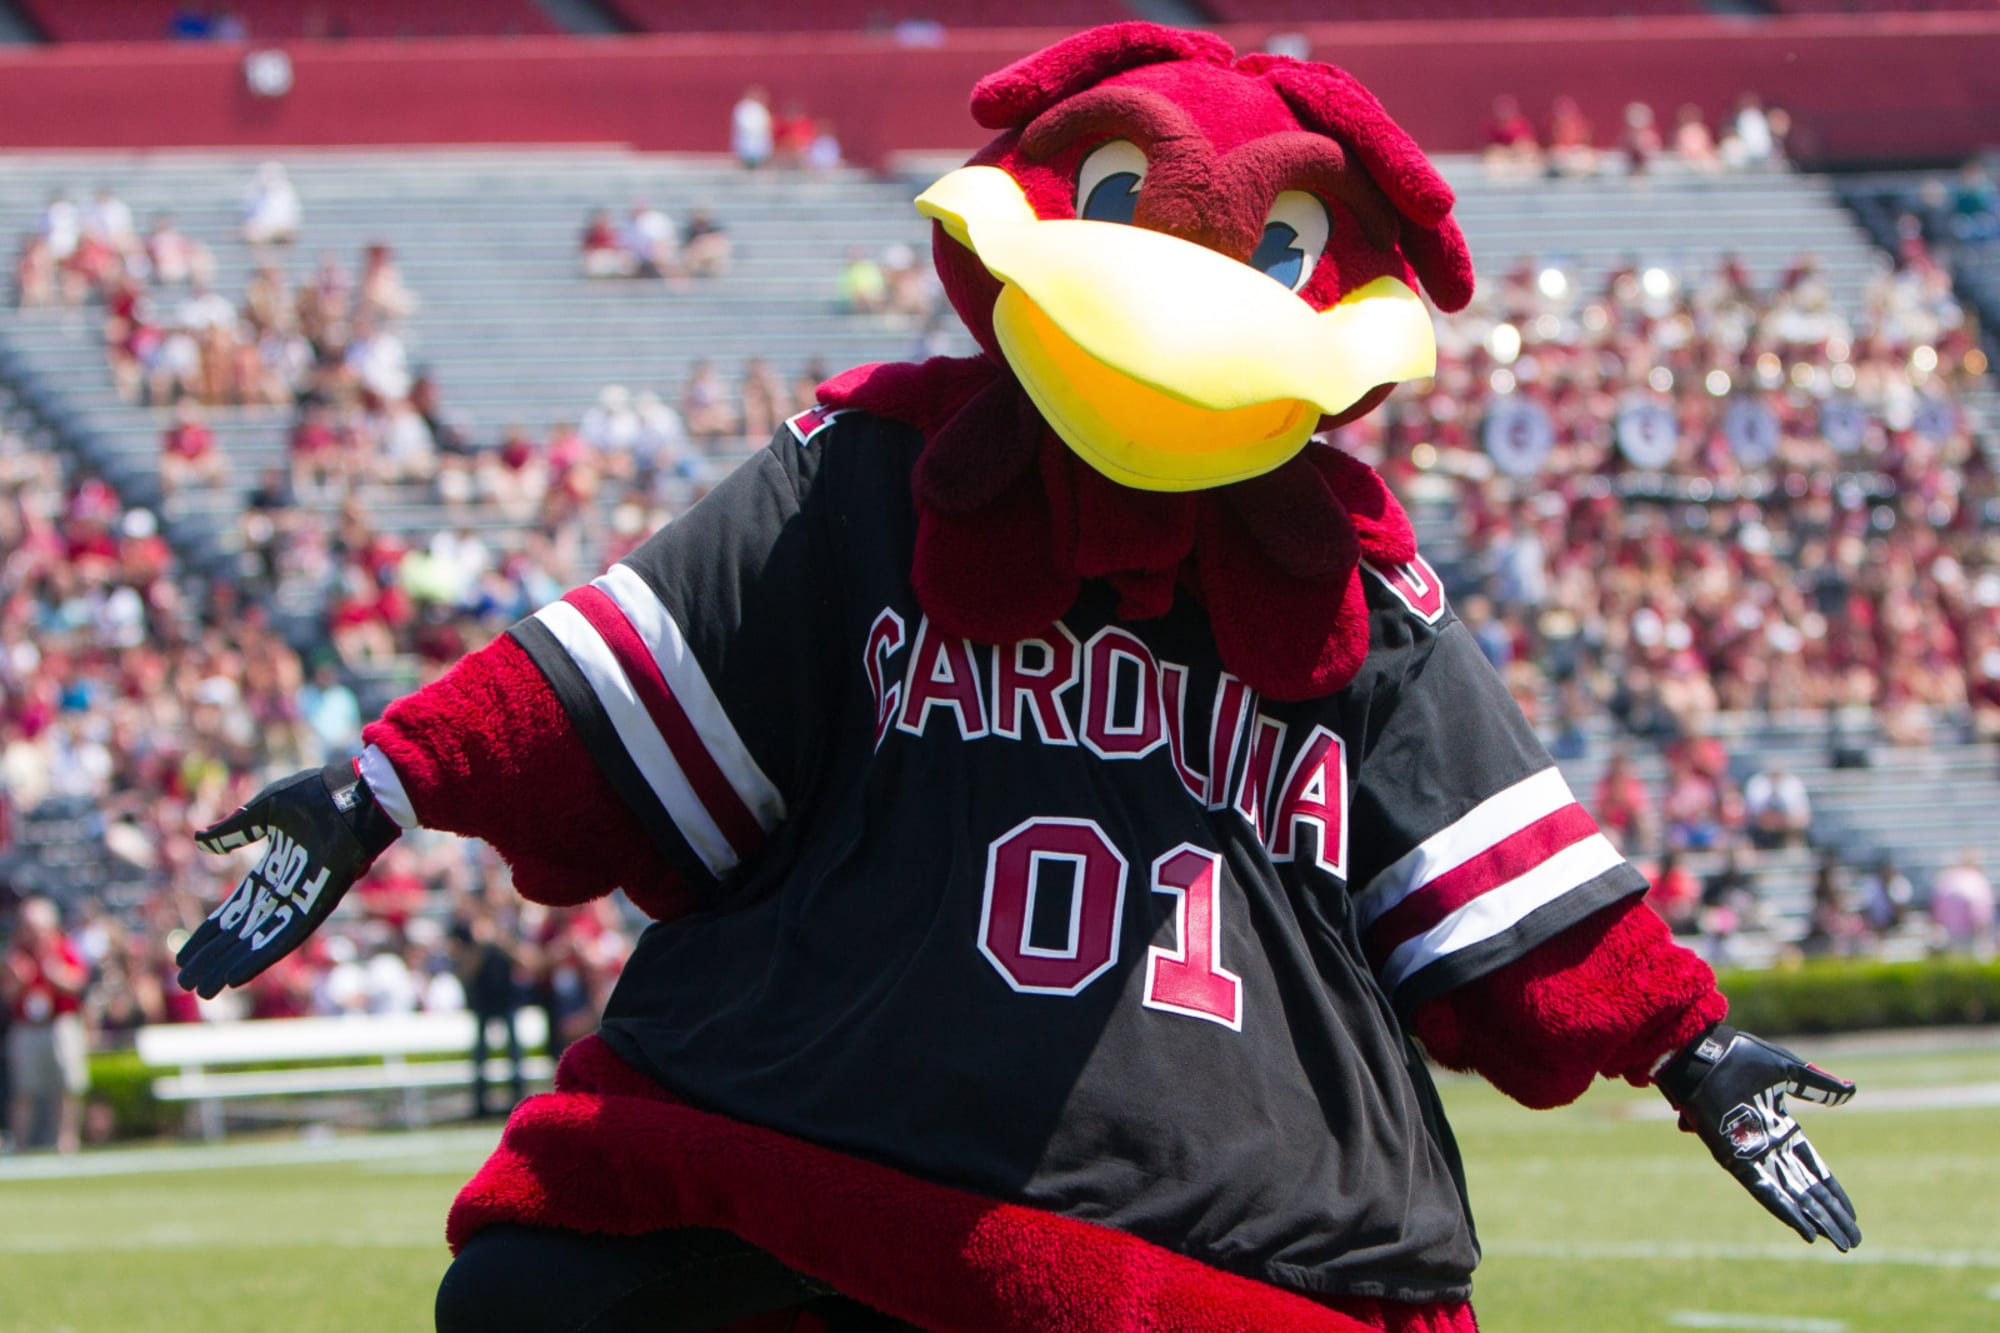 South Carolina actively recruiting talented quarterback prospects for the 2025 class